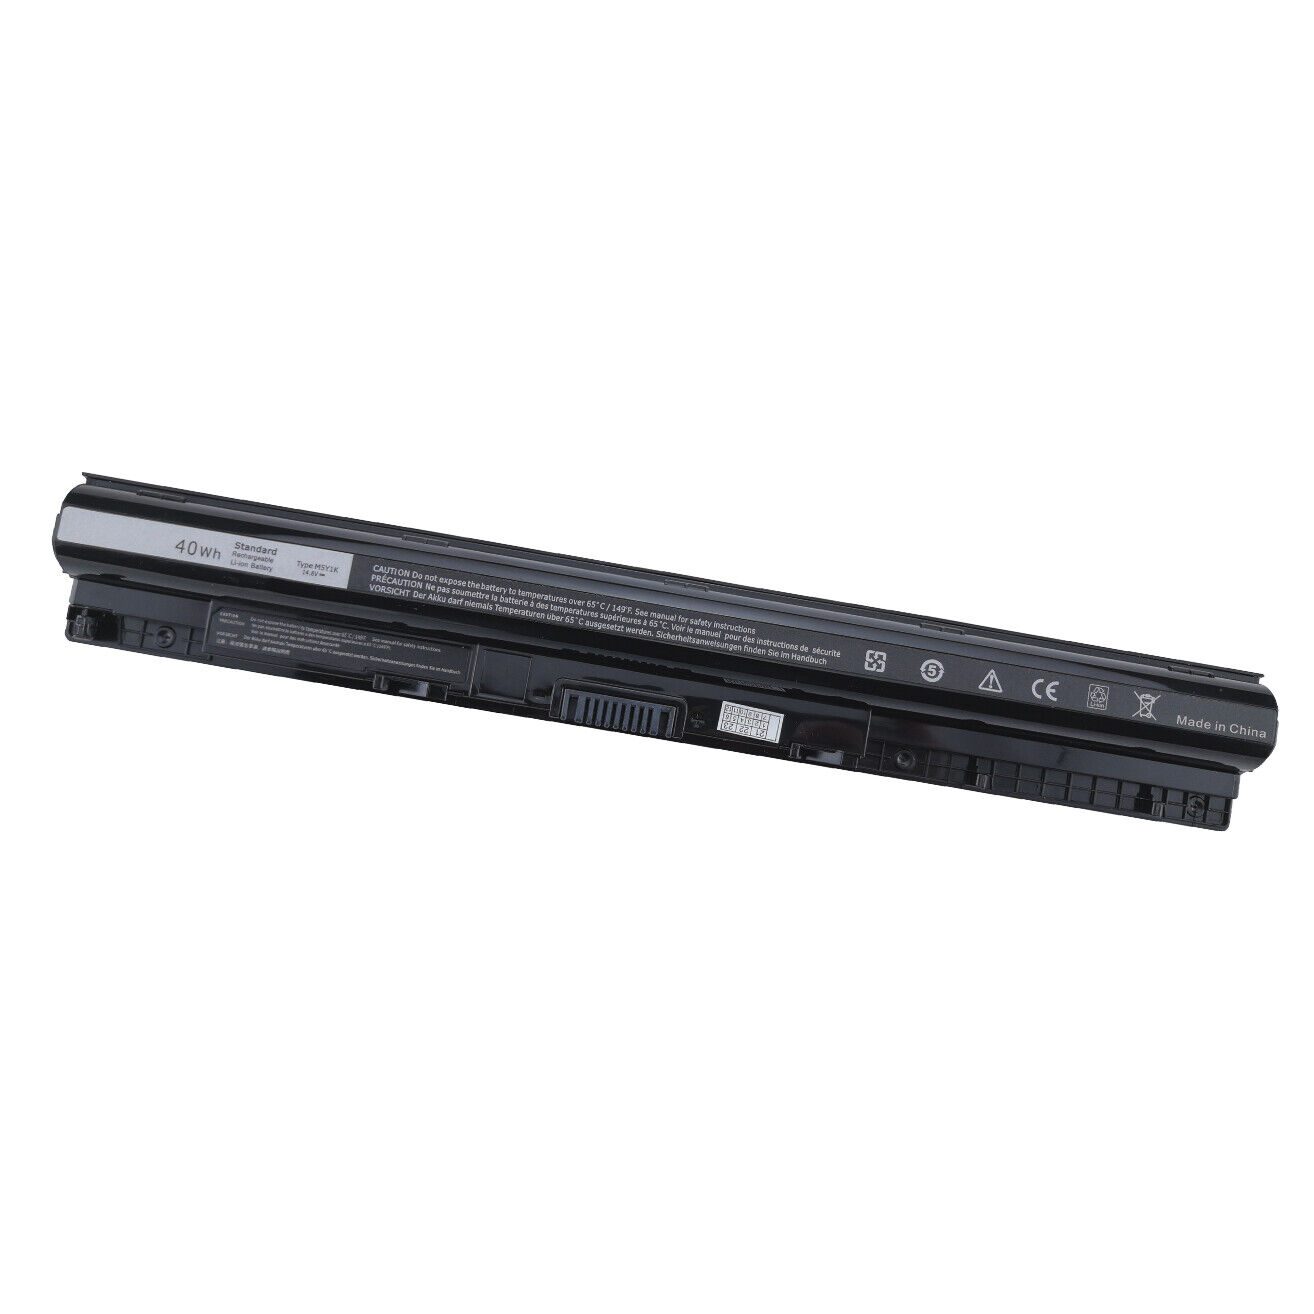 Lot M5Y1K Battery for Dell Inspiron 3551 3451 3567 5558 5758 14 15 3000 Series